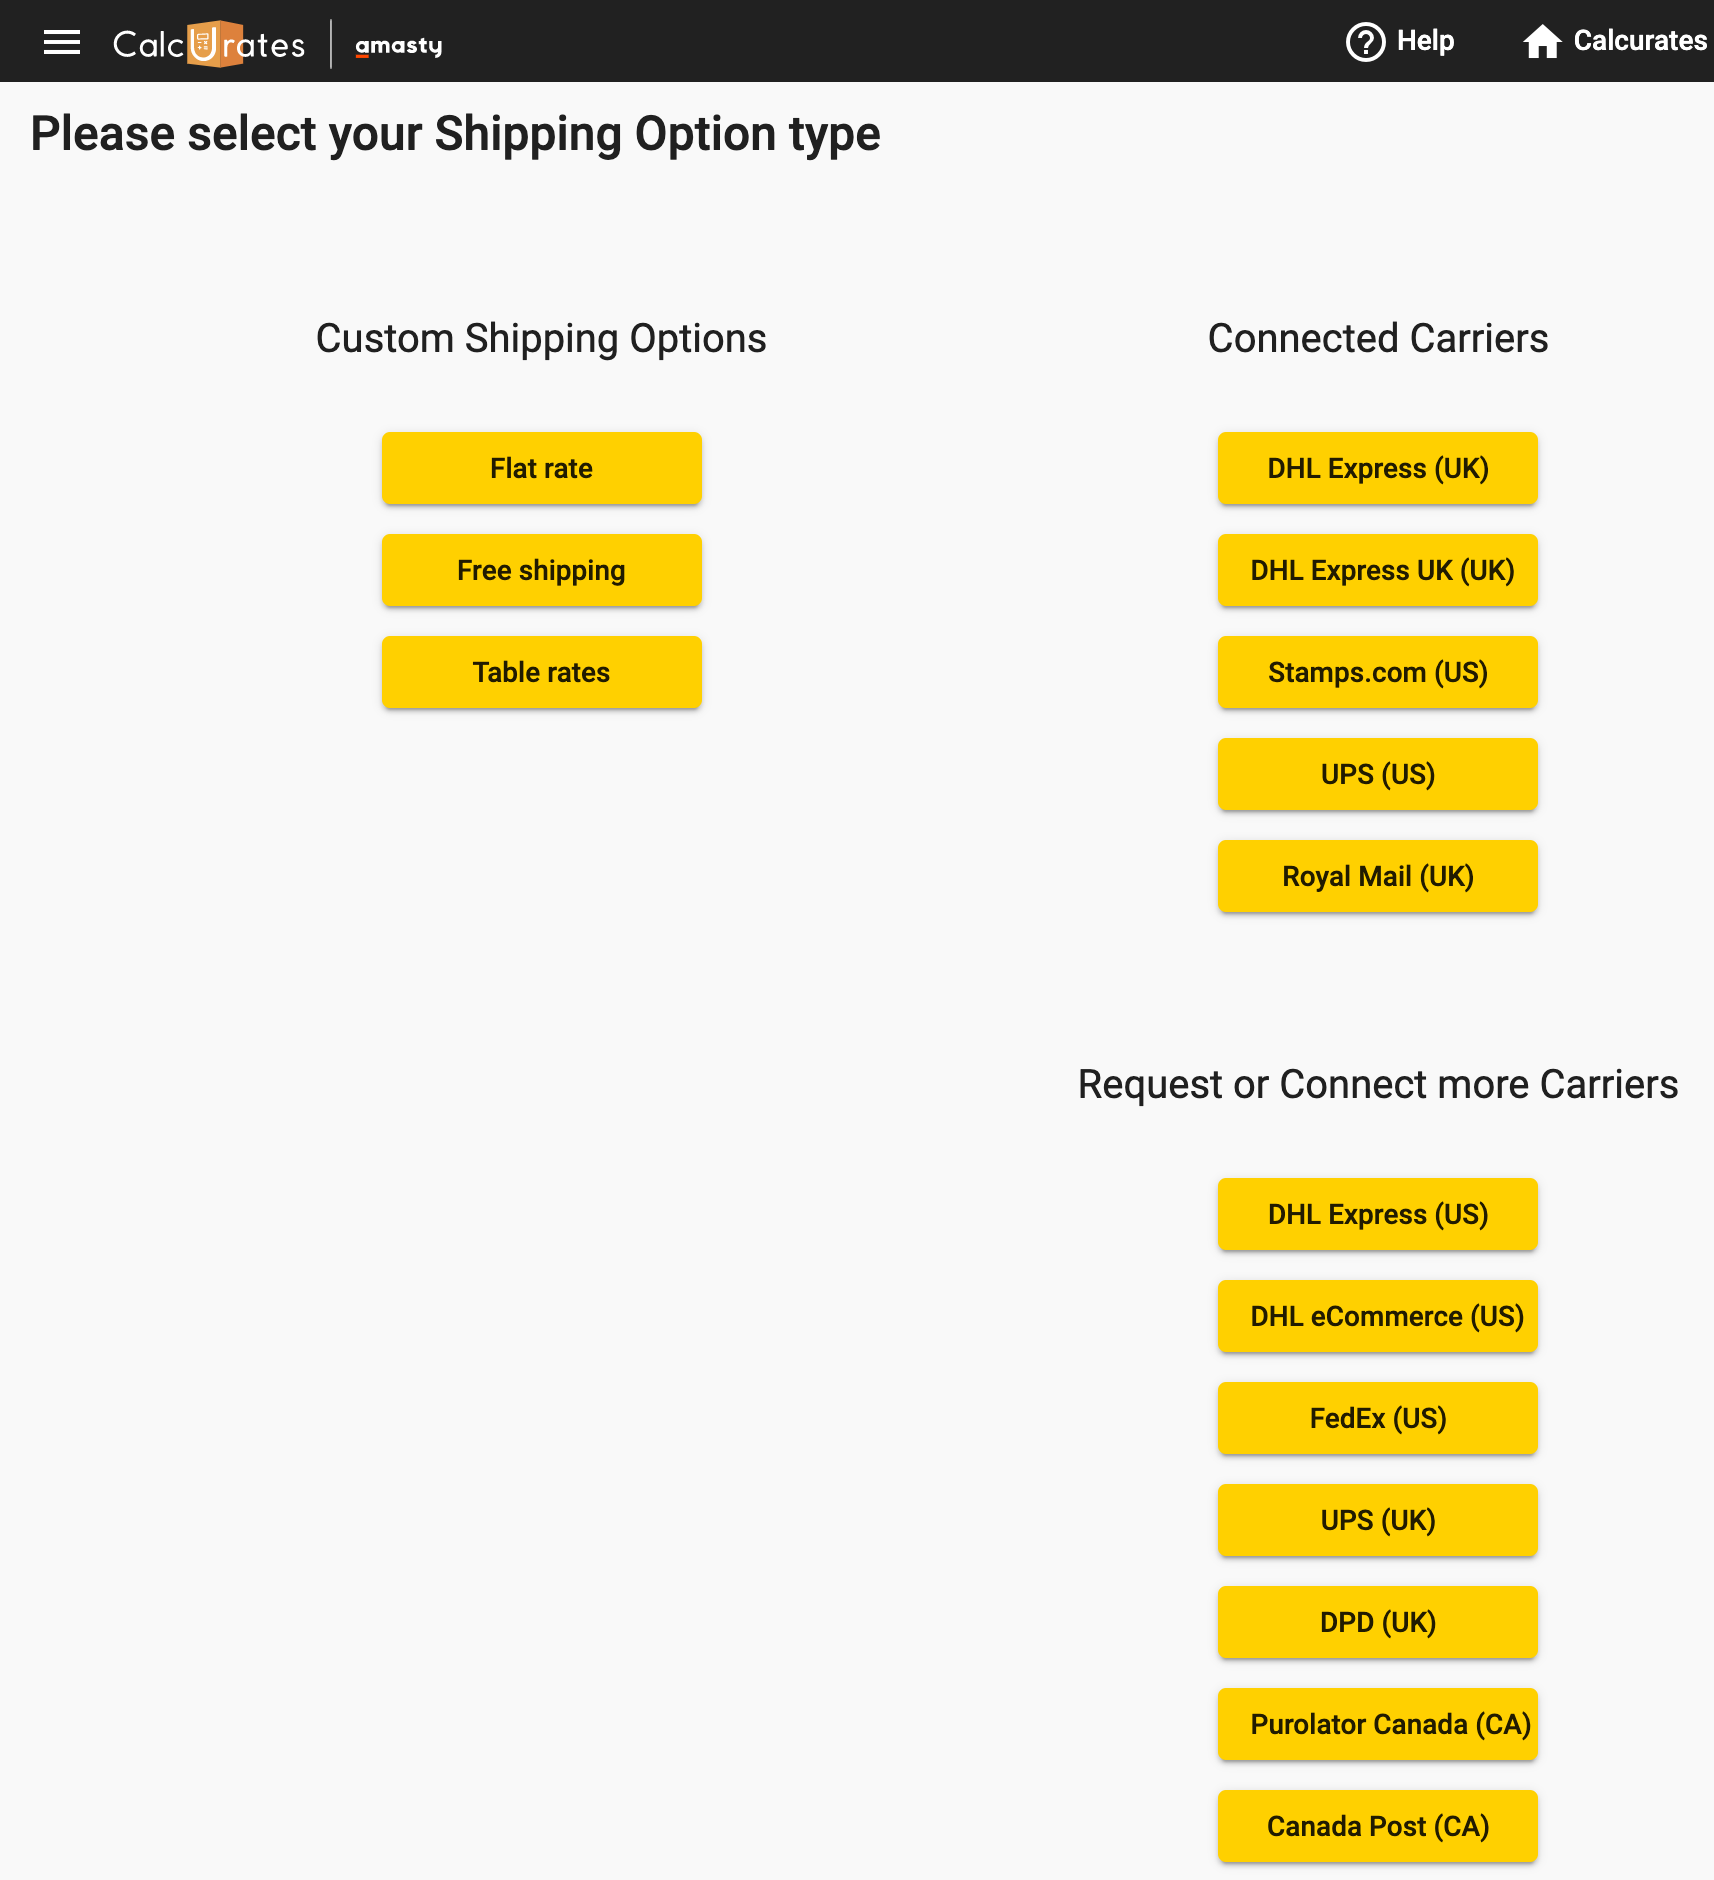 Shipping Option types